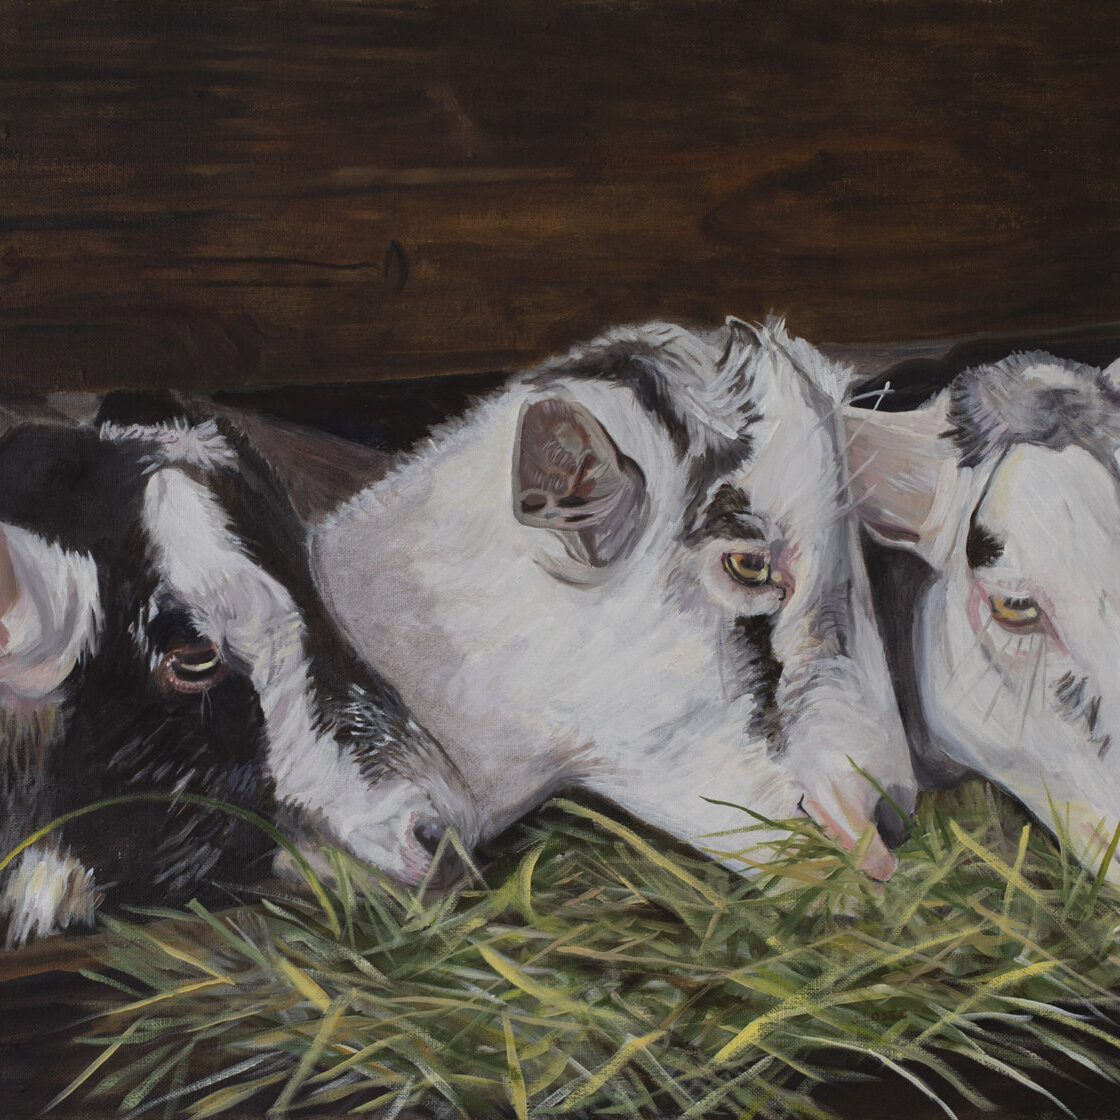 An oil on canvas painting of three goats